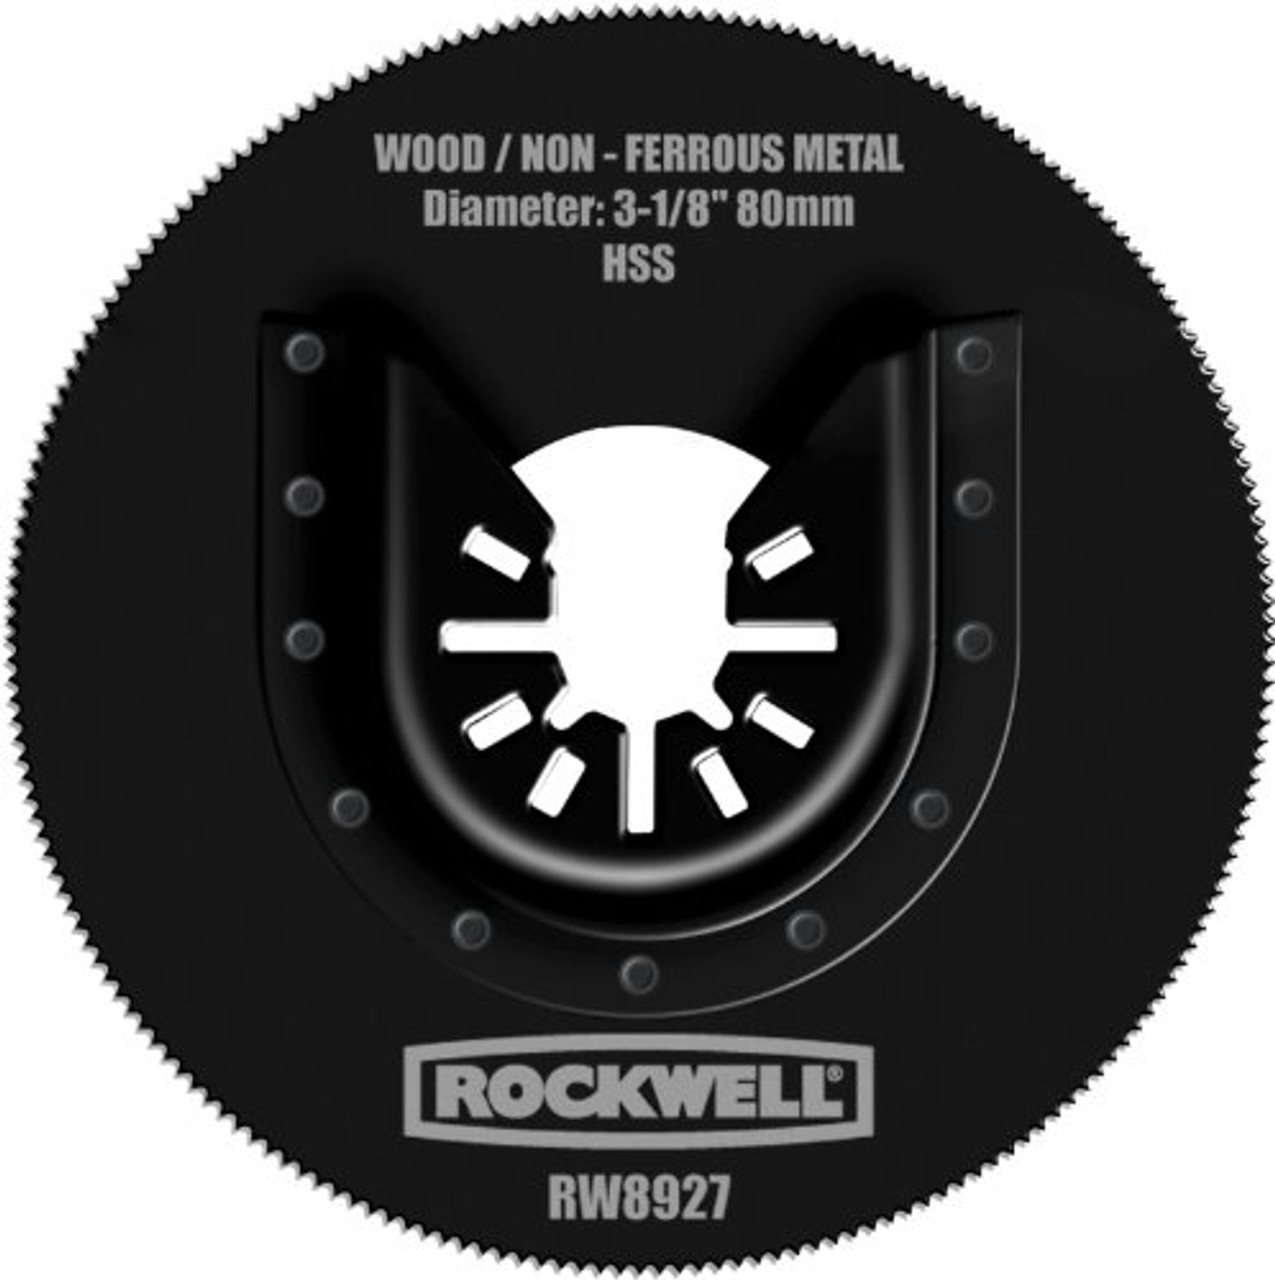 Rockwell RW8927 3-1/8-Inch Sonicrafter Oscillating Multitool HSS Saw Blade  with Universal Fit System Express Tool Supply